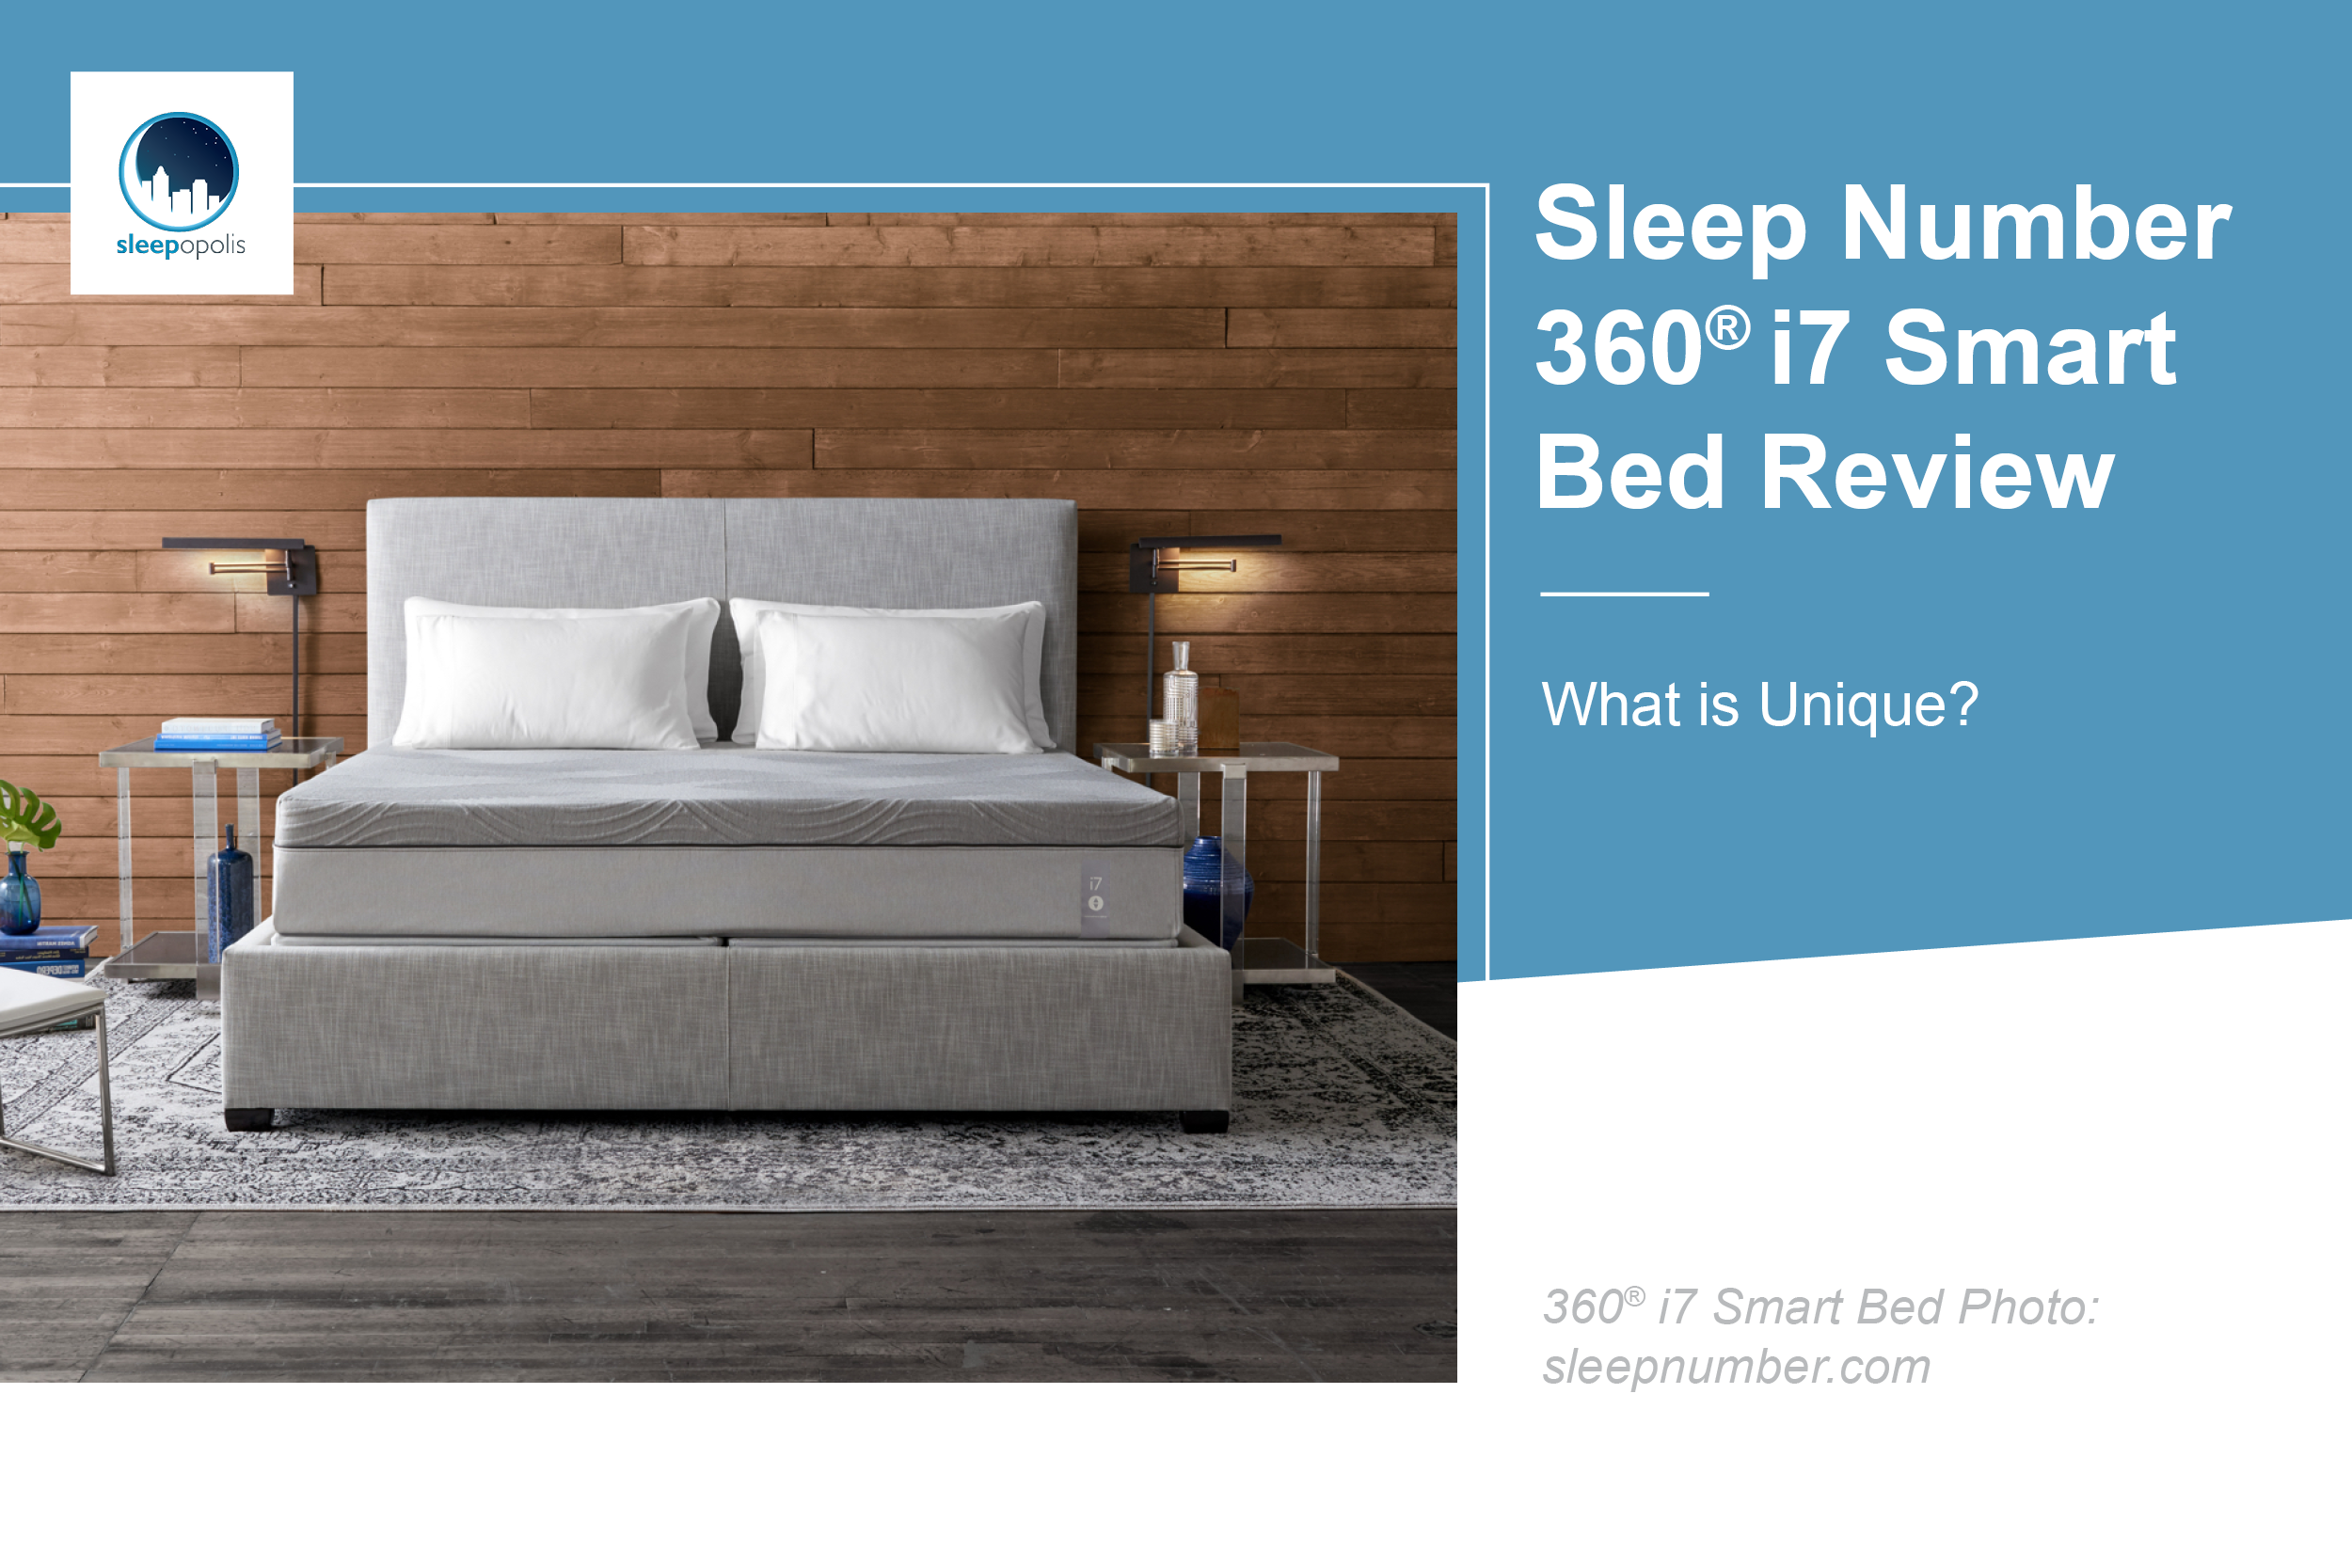 Sleep Number 360 I7 Smart Bed Review, Sleep Number C2 Bed Mattress King Size